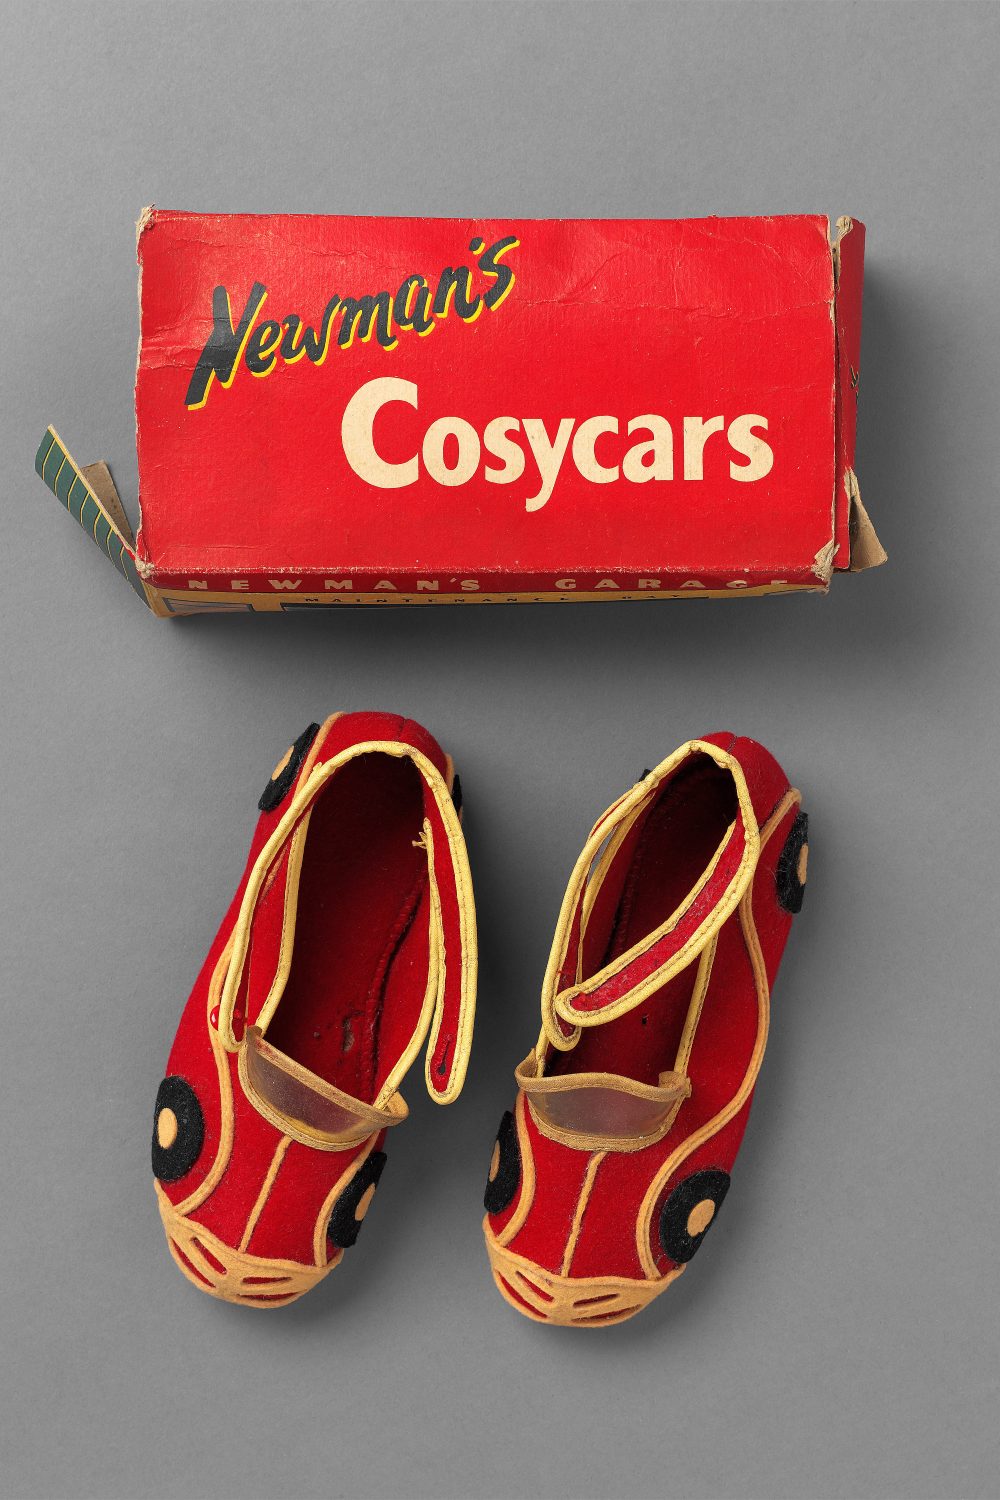 Child’s Slippers and Shoebox